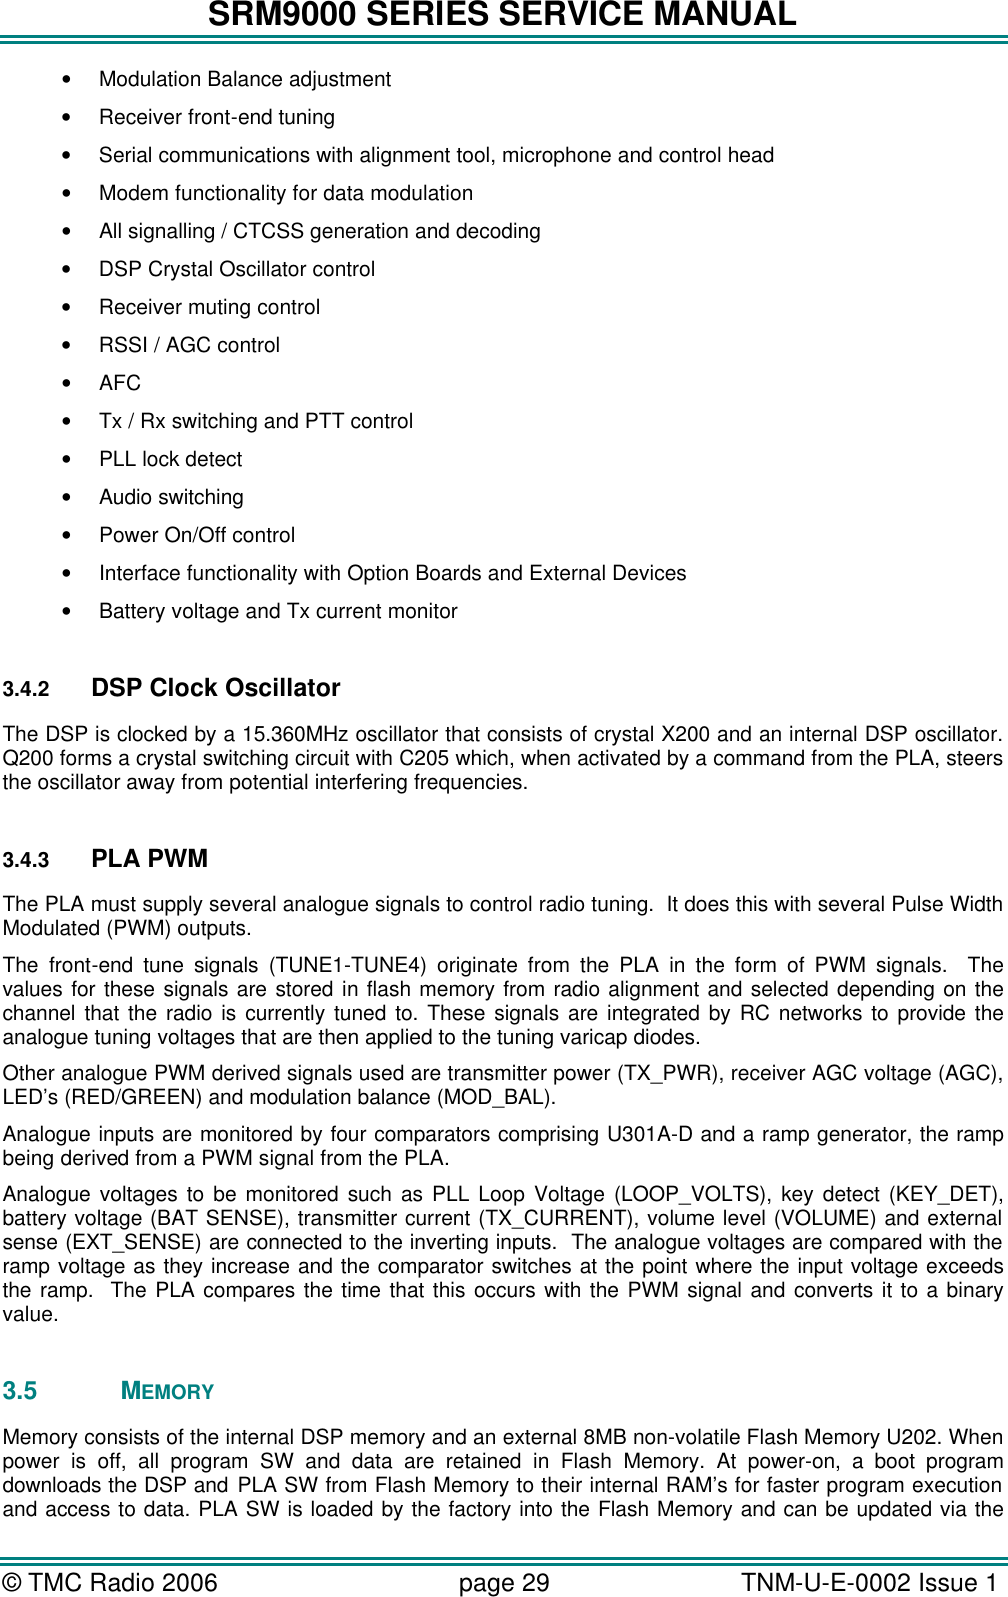 SRM9000 SERIES SERVICE MANUAL © TMC Radio 2006 page 29   TNM-U-E-0002 Issue 1  • Modulation Balance adjustment  • Receiver front-end tuning  • Serial communications with alignment tool, microphone and control head • Modem functionality for data modulation • All signalling / CTCSS generation and decoding • DSP Crystal Oscillator control • Receiver muting control • RSSI / AGC control • AFC • Tx / Rx switching and PTT control • PLL lock detect • Audio switching • Power On/Off control • Interface functionality with Option Boards and External Devices • Battery voltage and Tx current monitor  3.4.2 DSP Clock Oscillator The DSP is clocked by a 15.360MHz oscillator that consists of crystal X200 and an internal DSP oscillator. Q200 forms a crystal switching circuit with C205 which, when activated by a command from the PLA, steers the oscillator away from potential interfering frequencies.  3.4.3 PLA PWM The PLA must supply several analogue signals to control radio tuning.  It does this with several Pulse Width Modulated (PWM) outputs. The front-end tune signals (TUNE1-TUNE4) originate from the PLA in the form of PWM signals.  The values for these signals are stored in flash memory from radio alignment and selected depending on the channel that the radio is currently tuned to. These signals are integrated by RC networks to provide the analogue tuning voltages that are then applied to the tuning varicap diodes. Other analogue PWM derived signals used are transmitter power (TX_PWR), receiver AGC voltage (AGC), LED’s (RED/GREEN) and modulation balance (MOD_BAL). Analogue inputs are monitored by four comparators comprising U301A-D and a ramp generator, the ramp being derived from a PWM signal from the PLA.  Analogue voltages to be monitored such as PLL Loop Voltage (LOOP_VOLTS), key detect (KEY_DET), battery voltage (BAT SENSE), transmitter current (TX_CURRENT), volume level (VOLUME) and external sense (EXT_SENSE) are connected to the inverting inputs.  The analogue voltages are compared with the ramp voltage as they increase and the comparator switches at the point where the input voltage exceeds the ramp.  The PLA compares the time that this occurs with the PWM signal and converts it to a binary value.  3.5 MEMORY Memory consists of the internal DSP memory and an external 8MB non-volatile Flash Memory U202. When power is off, all program SW and data are retained in Flash Memory. At power-on, a boot program downloads the DSP and PLA SW from Flash Memory to their internal RAM’s for faster program execution and access to data. PLA SW is loaded by the factory into the Flash Memory and can be updated via the 